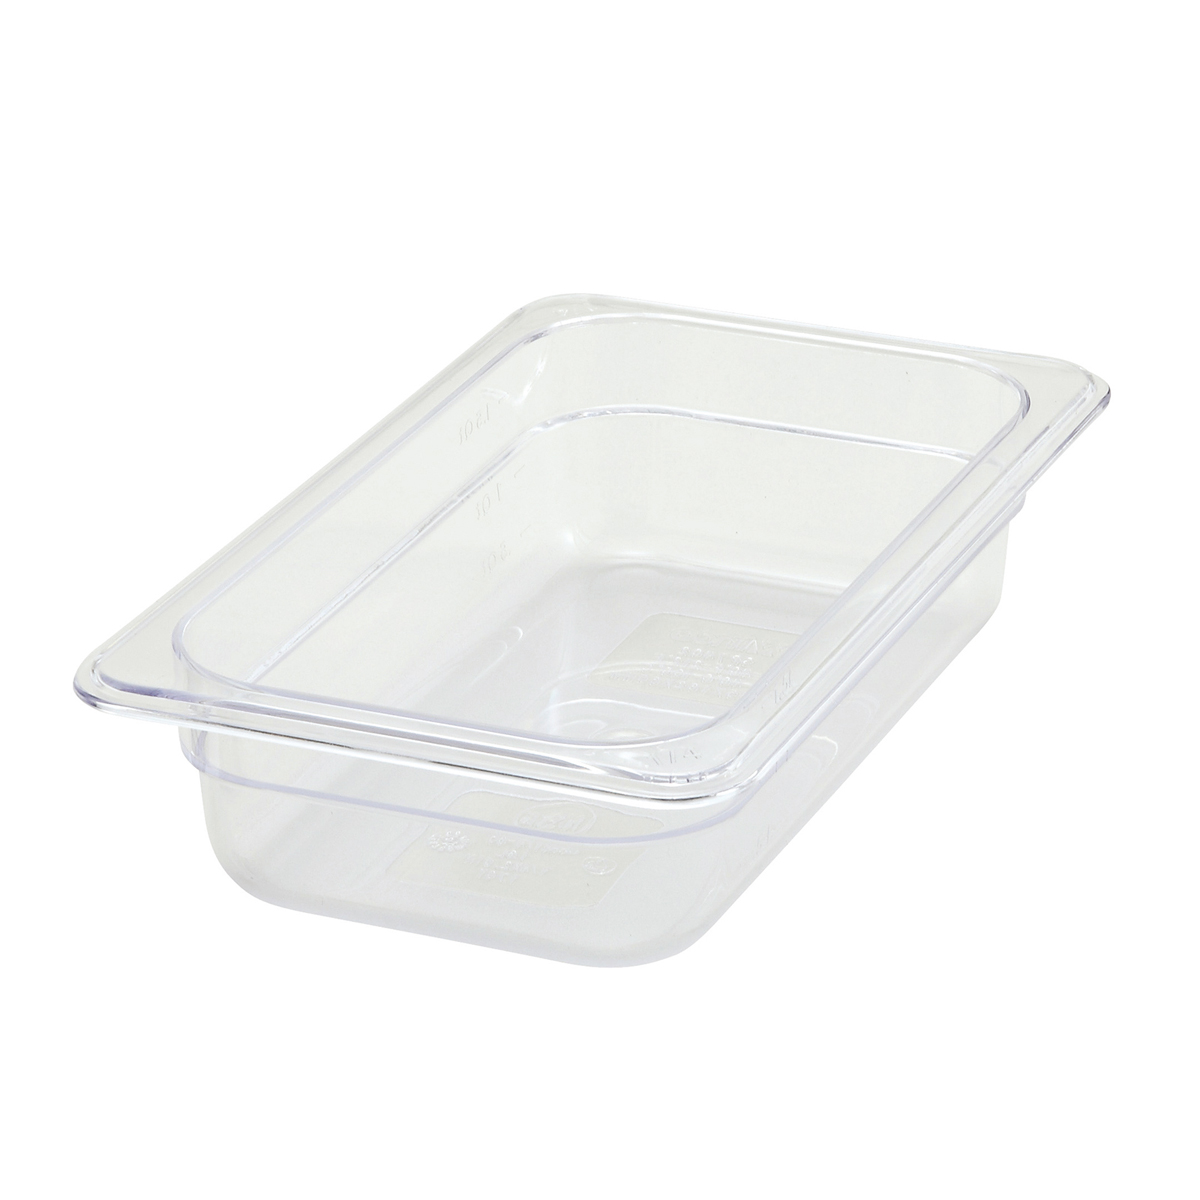 Winco SP7402 Poly-Ware Polycarbonate 1/4 Size Food Pan 2-1/2" High